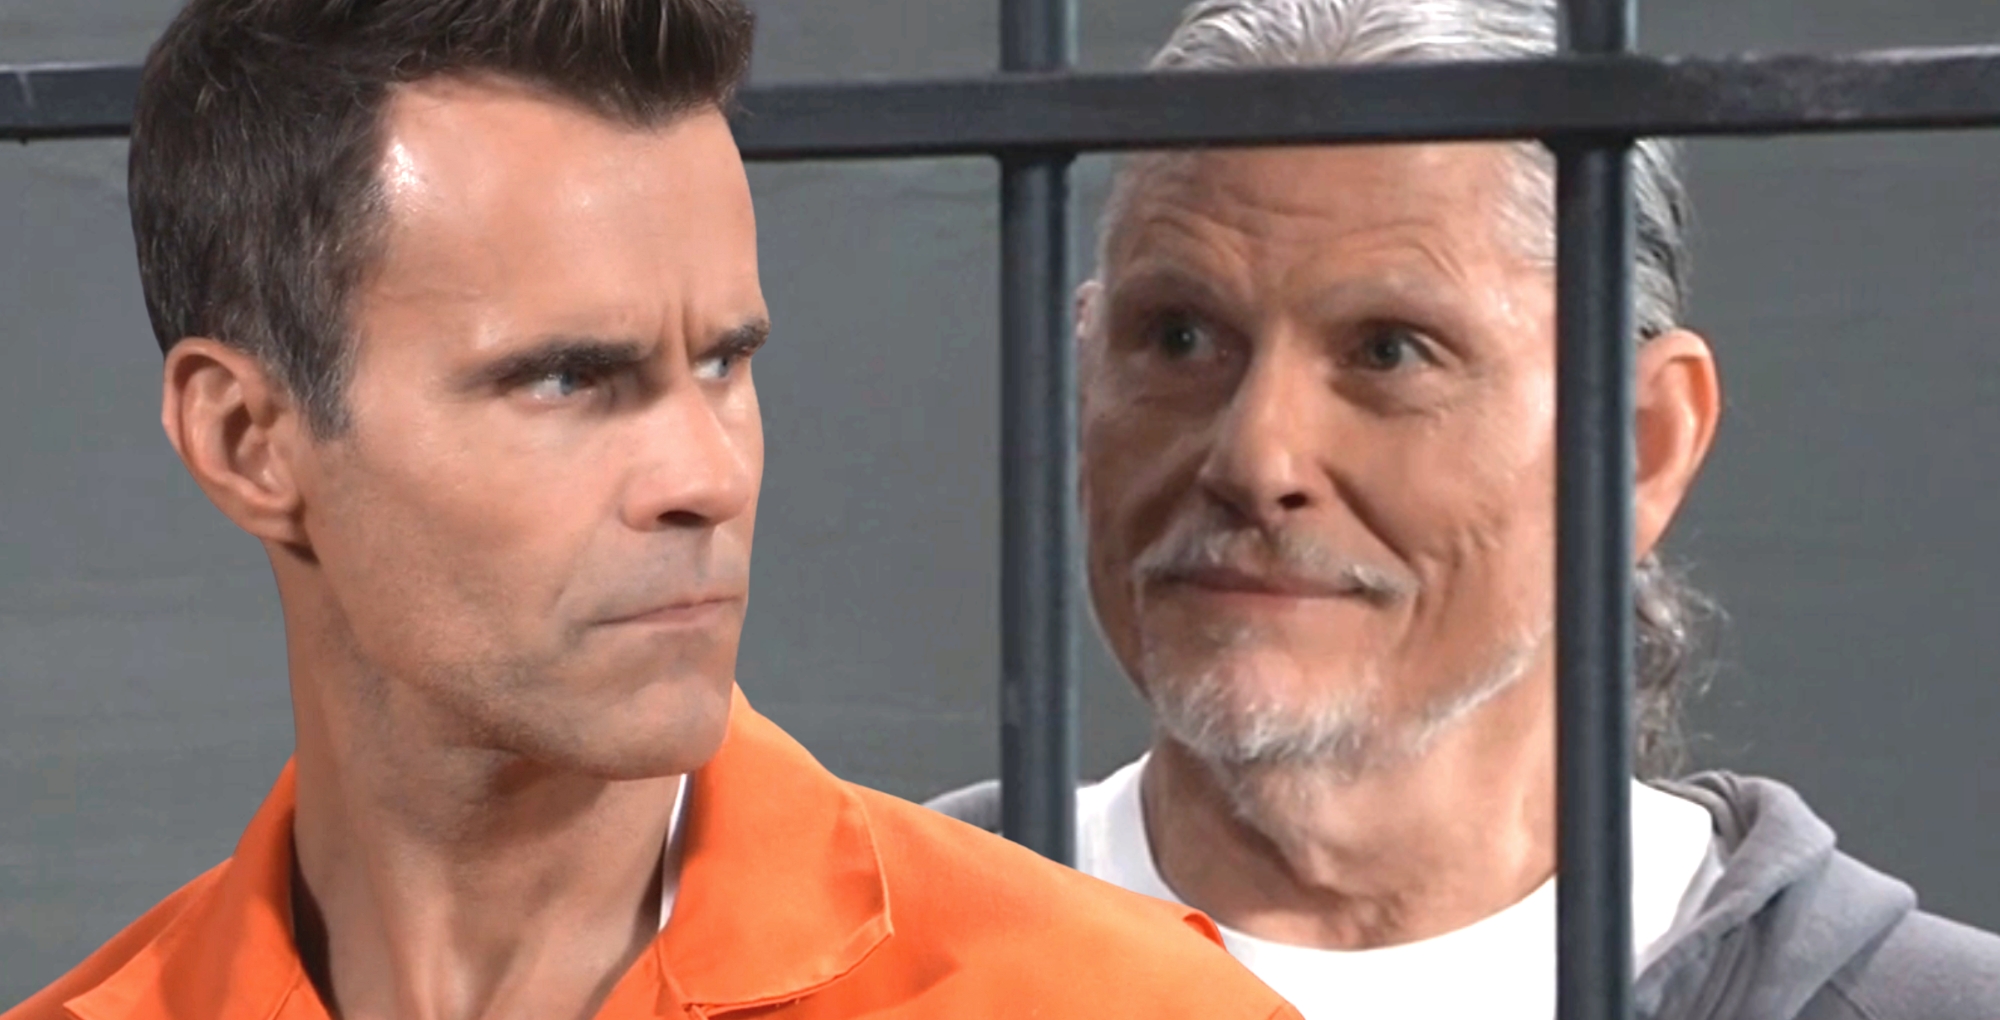 drew cain and cyrus renault behind bars on general hospital.